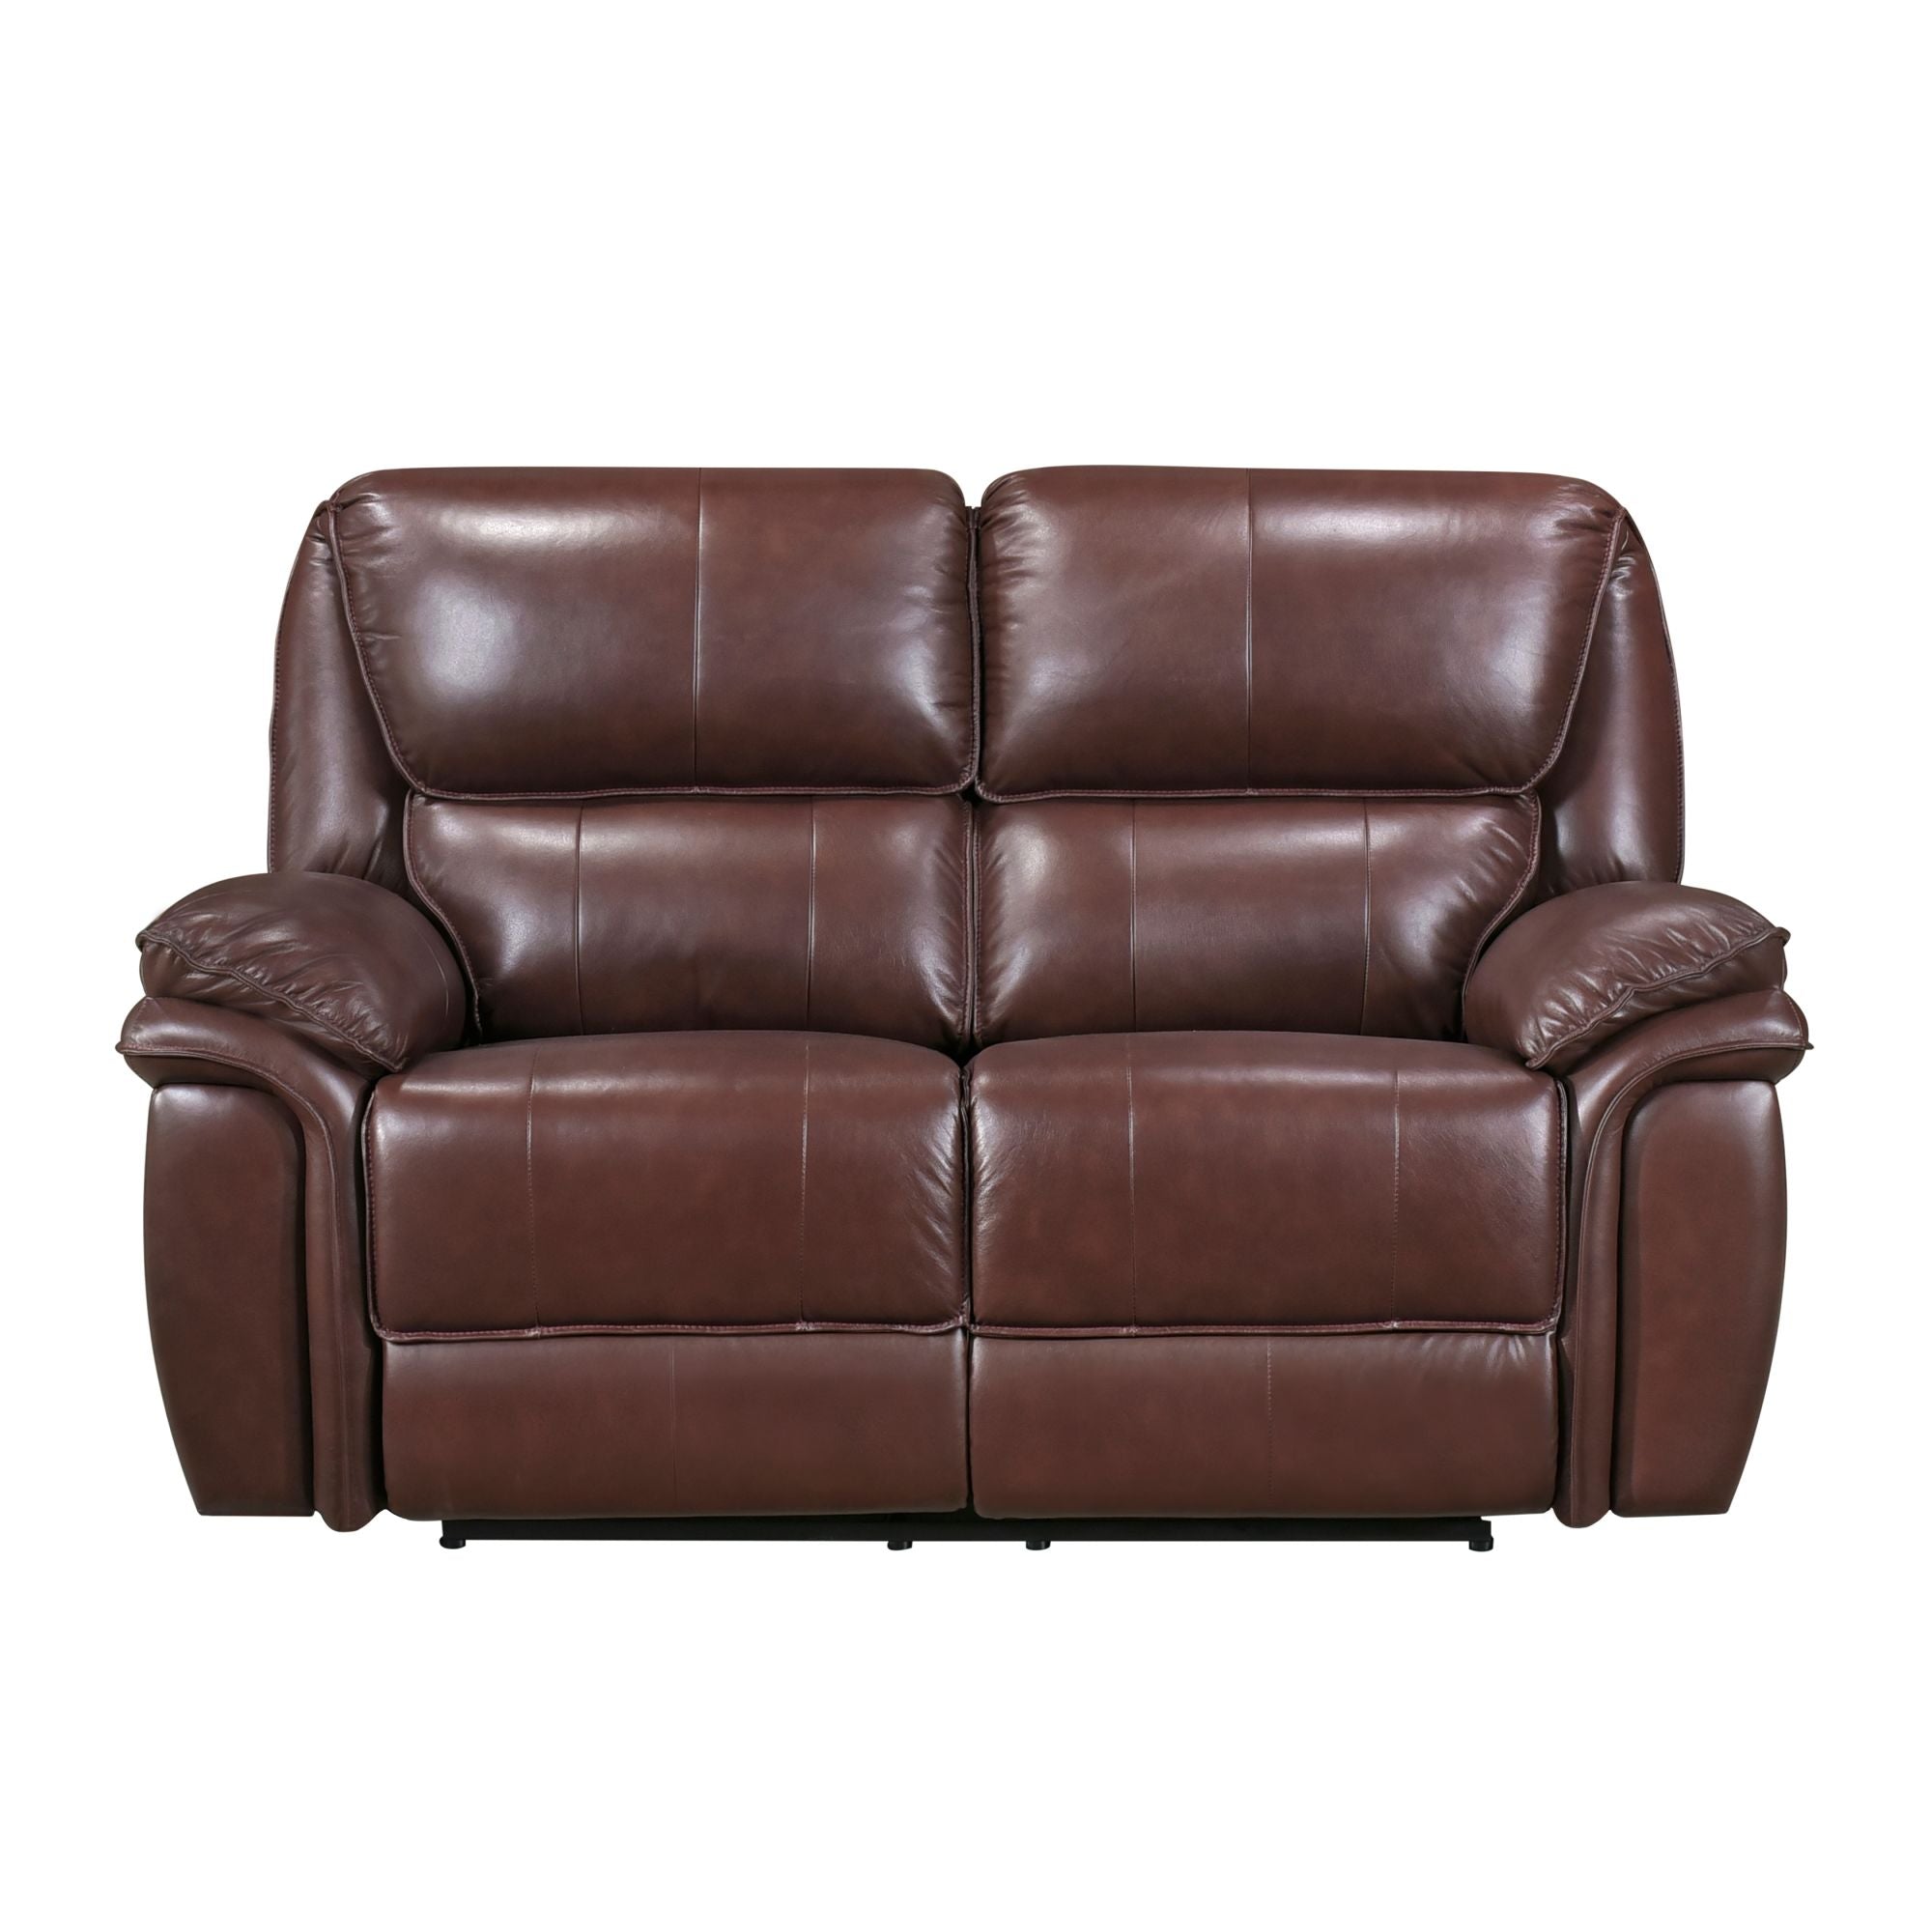 Olympia Bay Luxurious Double Reclining Brown Leather Loveseat 1pc